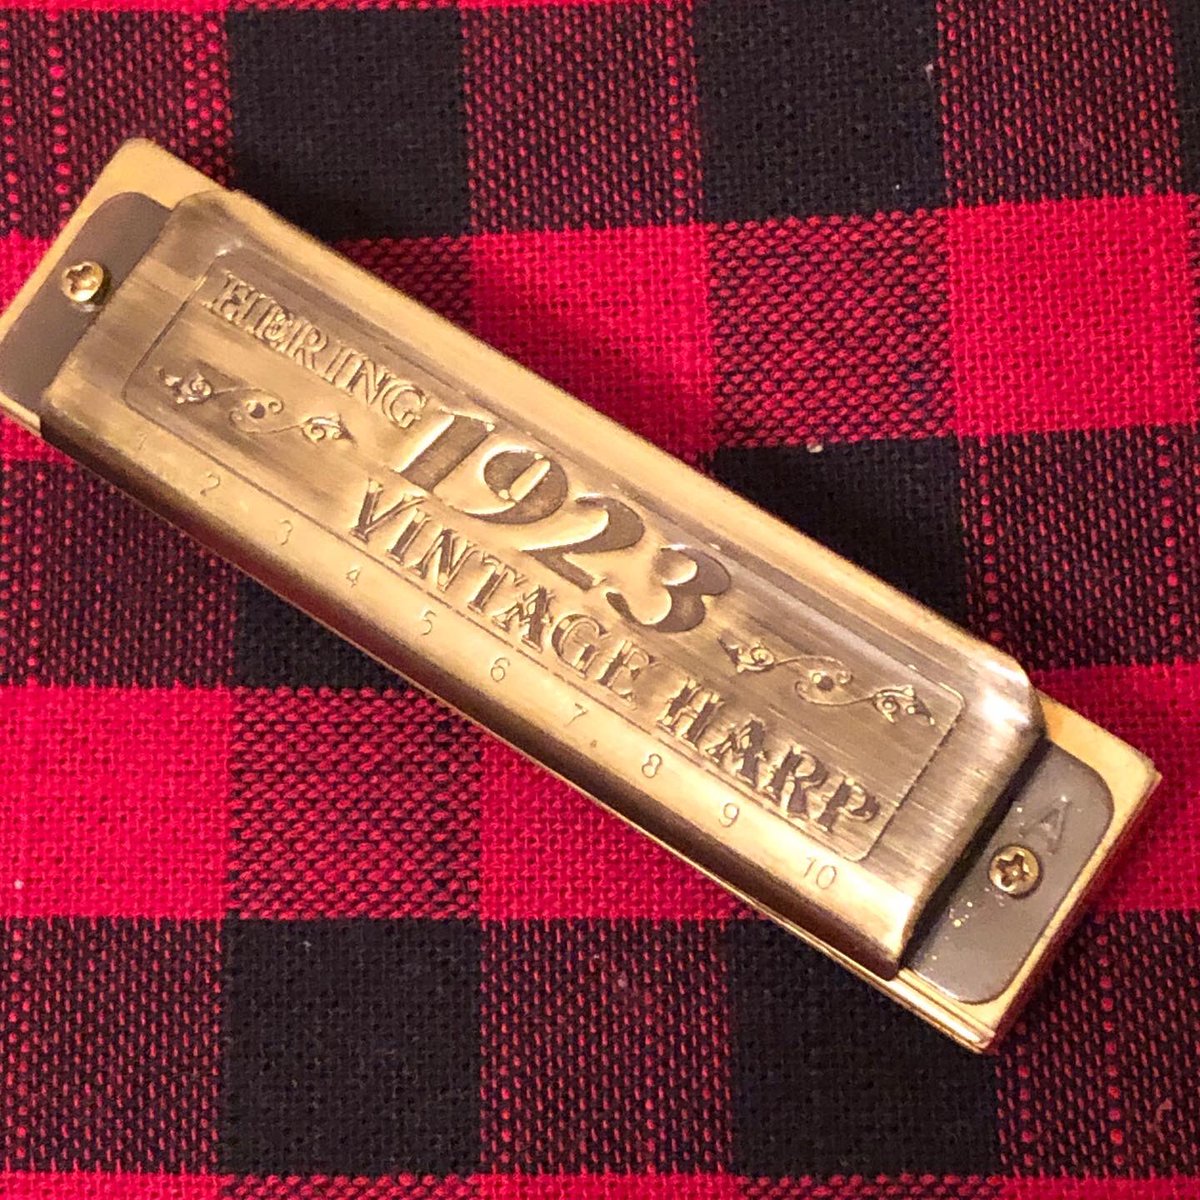 Happy New Year from the Garden State Harmonica Club! Looking forward to a great 2023! #harmonica #harmonicaplayer #harmonicablues #harmonicas #bluesharmonica #heringharmonicas  #harmonicaclub #gardenstateharmonicaclub #newjersey #music #diatonicharmonica #newyear